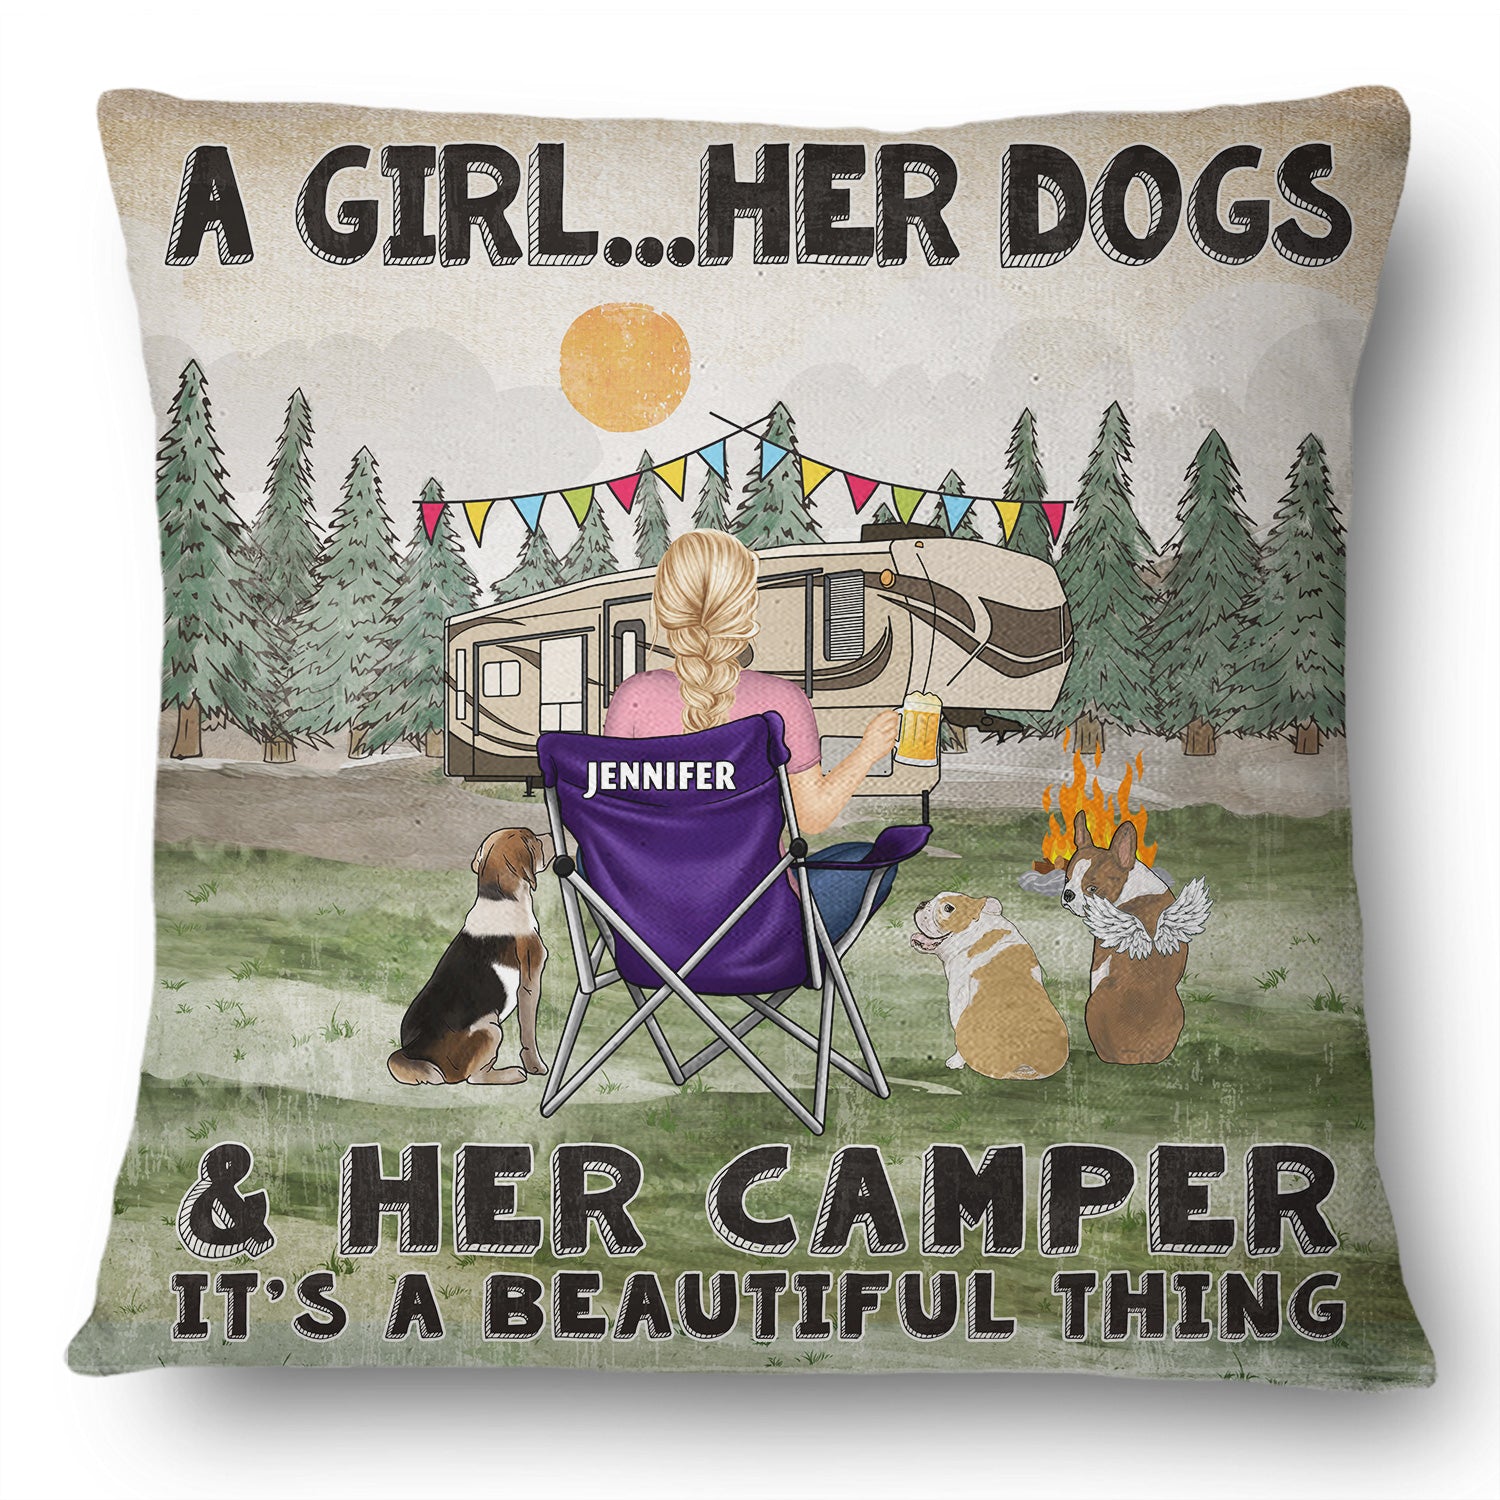 A Girl And Her Dogs Beautiful Thing - Gift For Camping Lovers - Personalized Pillow